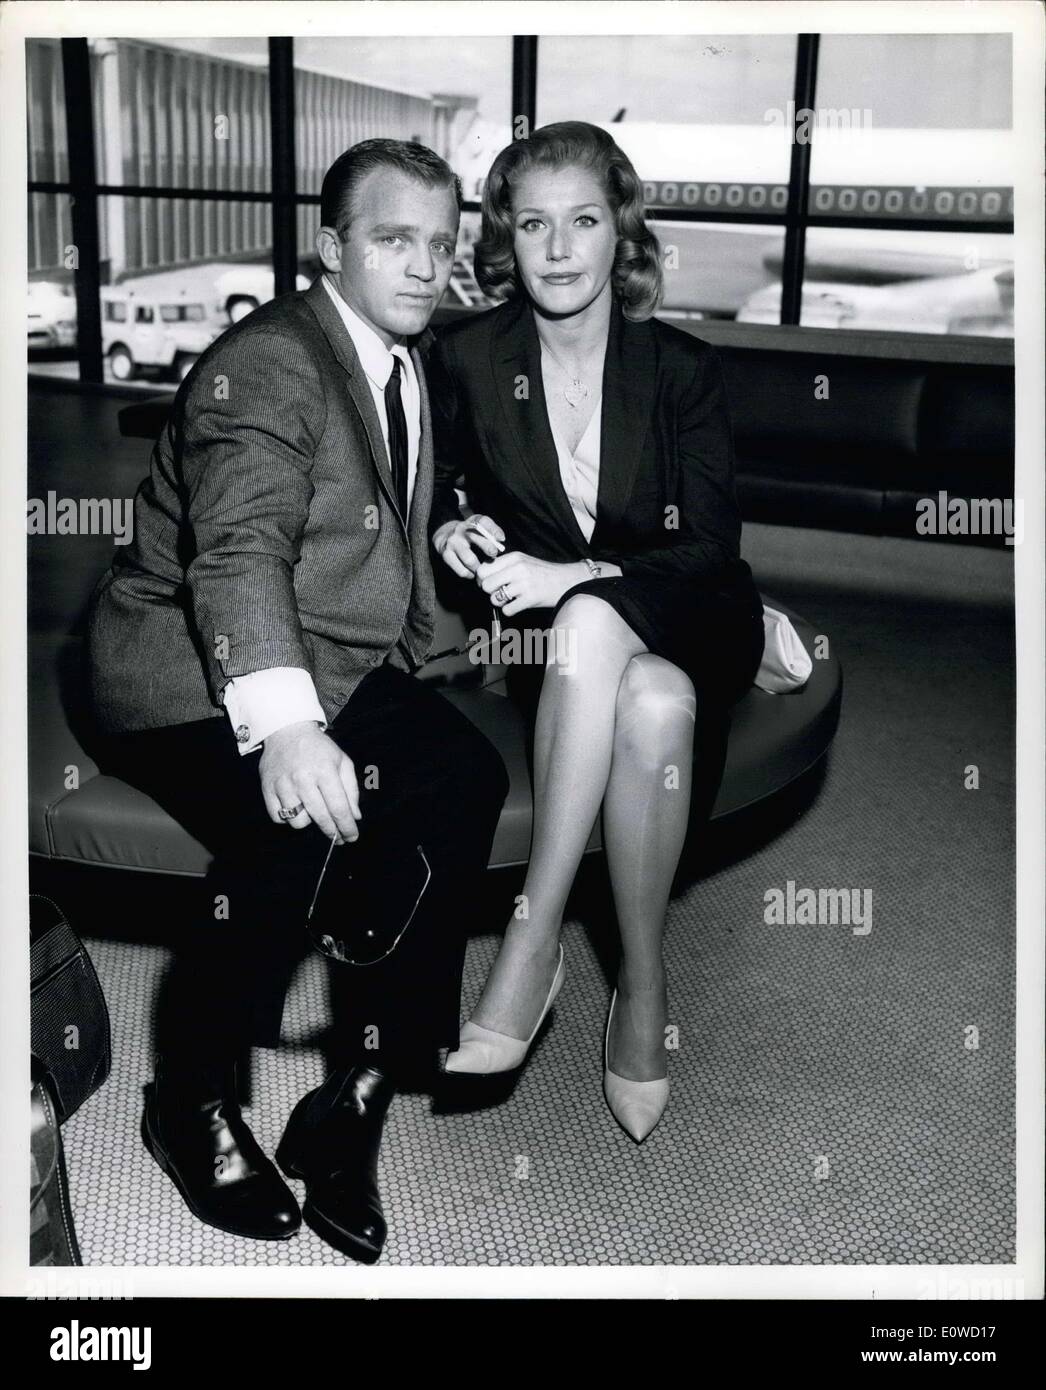 May 31, 1962 - Gary Crosby one of the talented sons of the popular Bing  Crosby, is shown with his pretty wife prior to boarding Stock Photo - Alamy